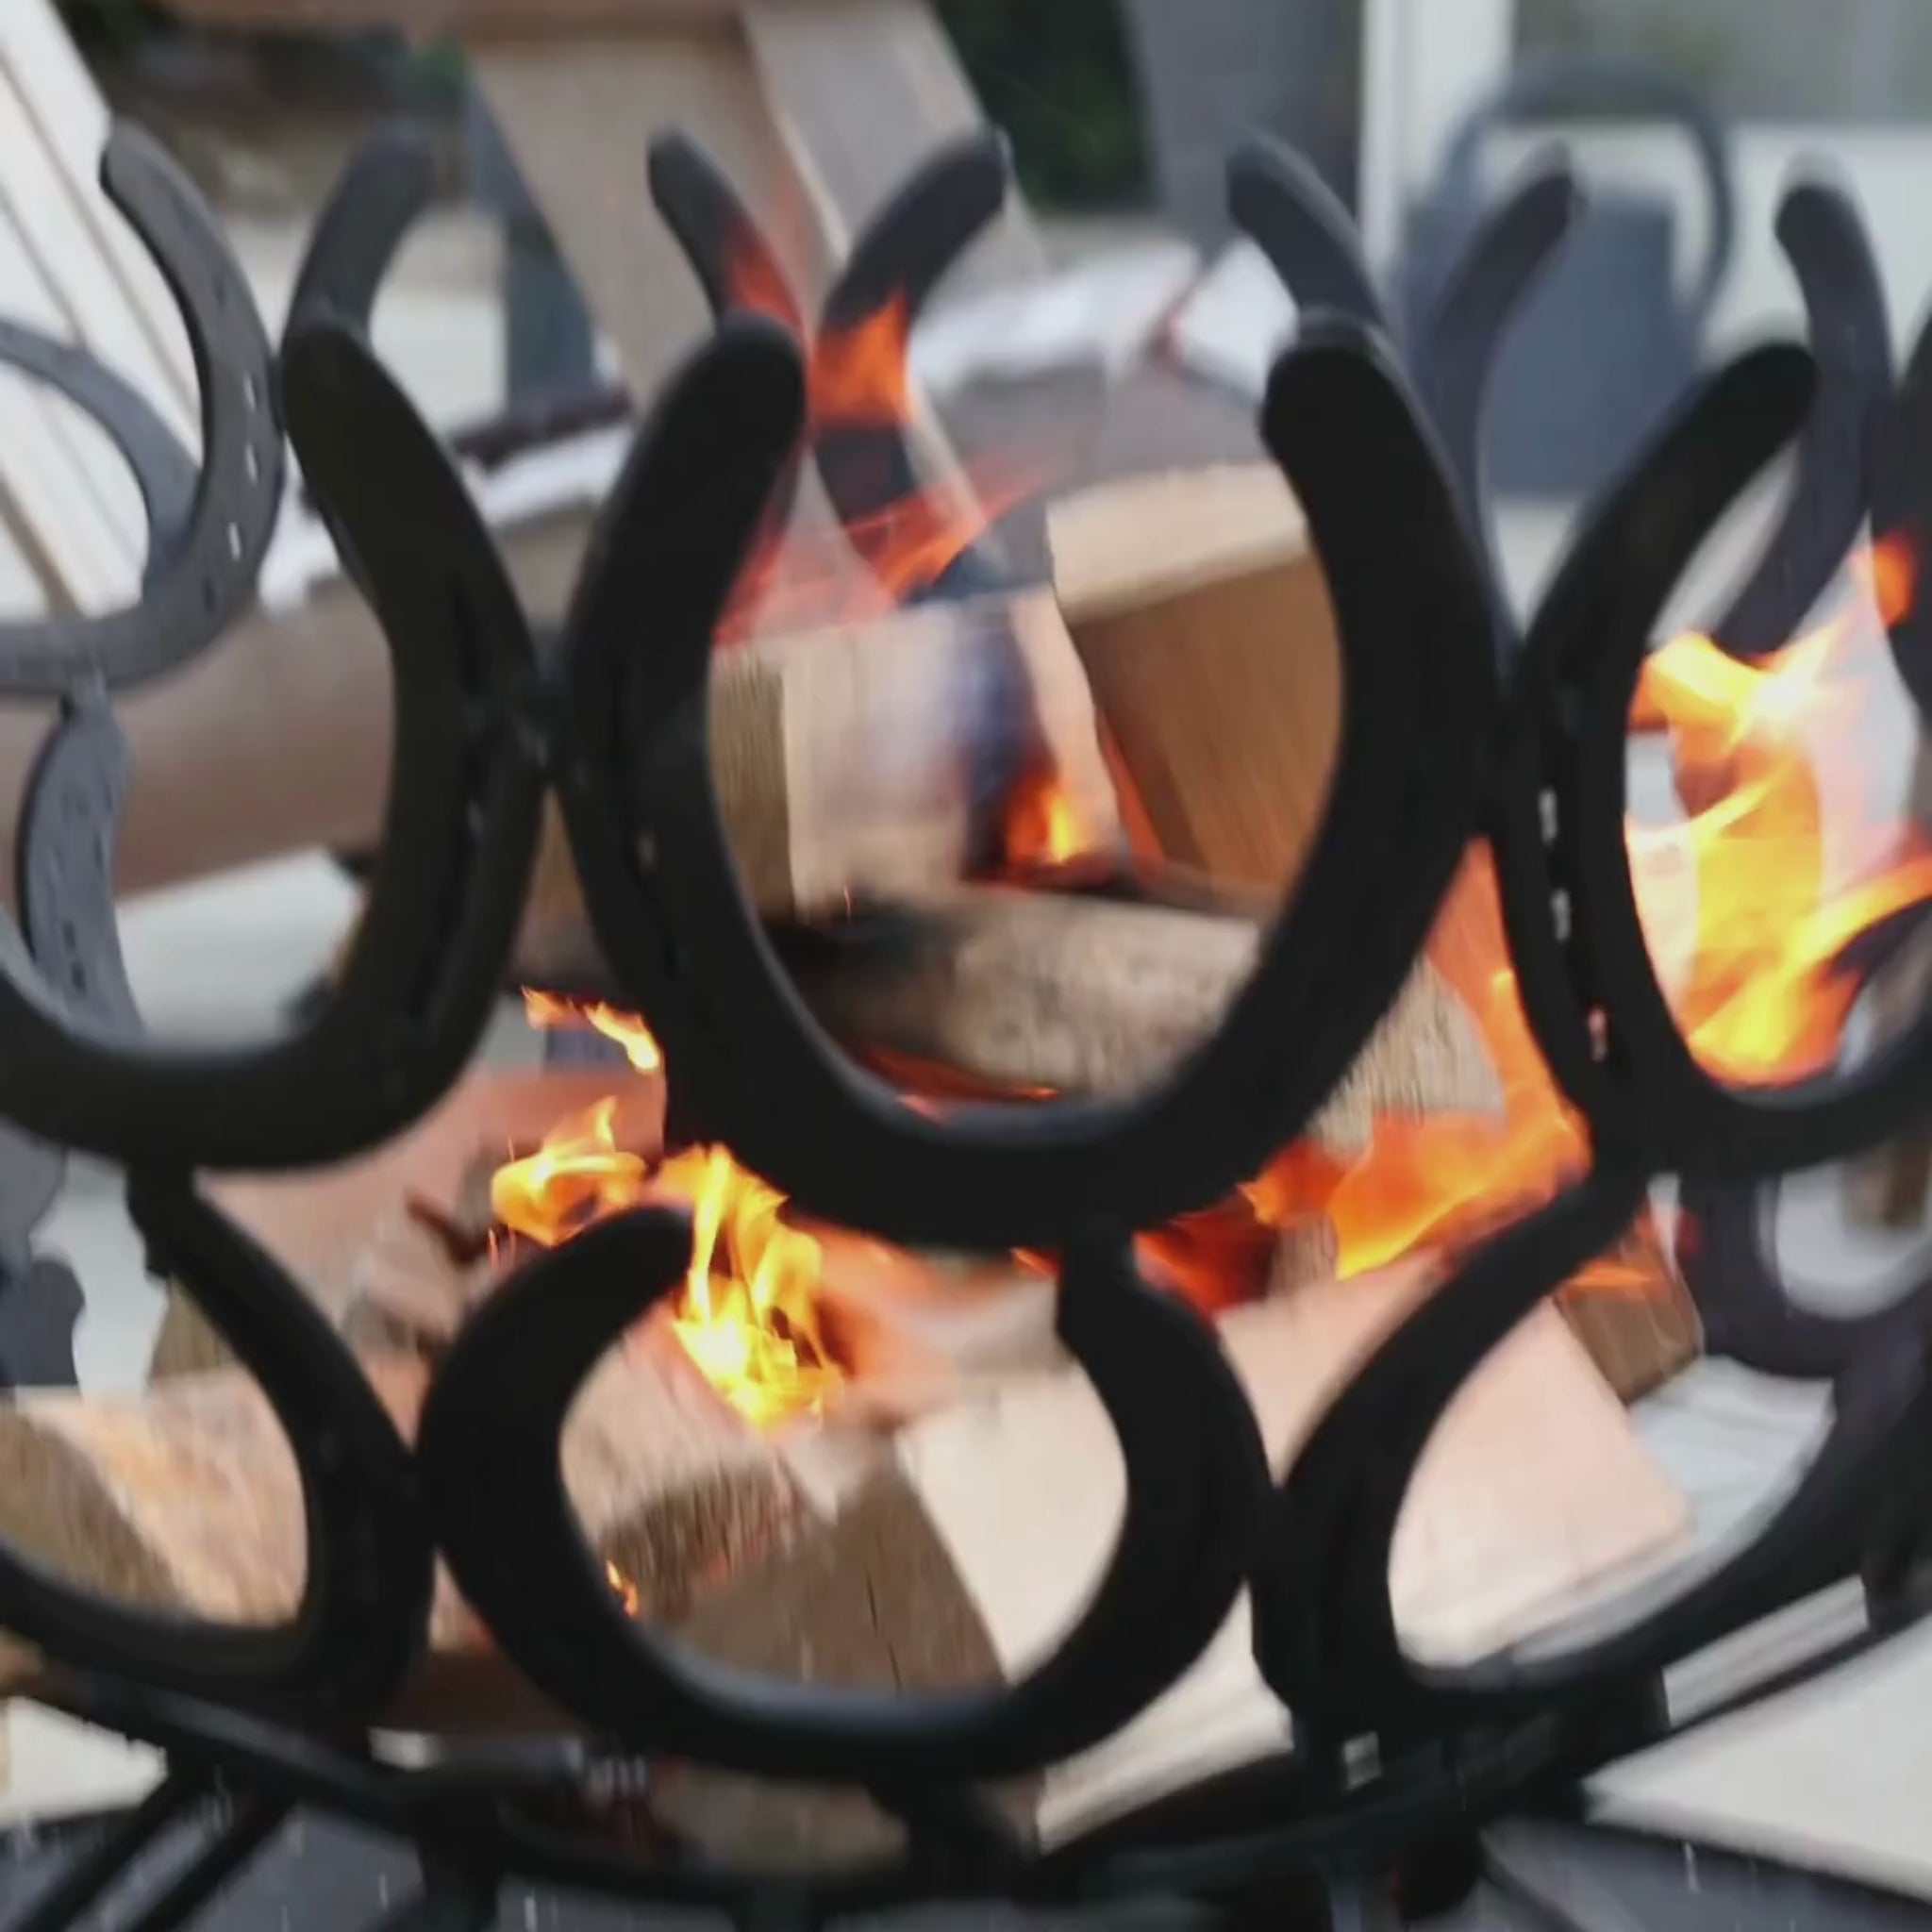 Slow motion footage of firewood being lit in a handmade horseshoe fire pit in a country garden.